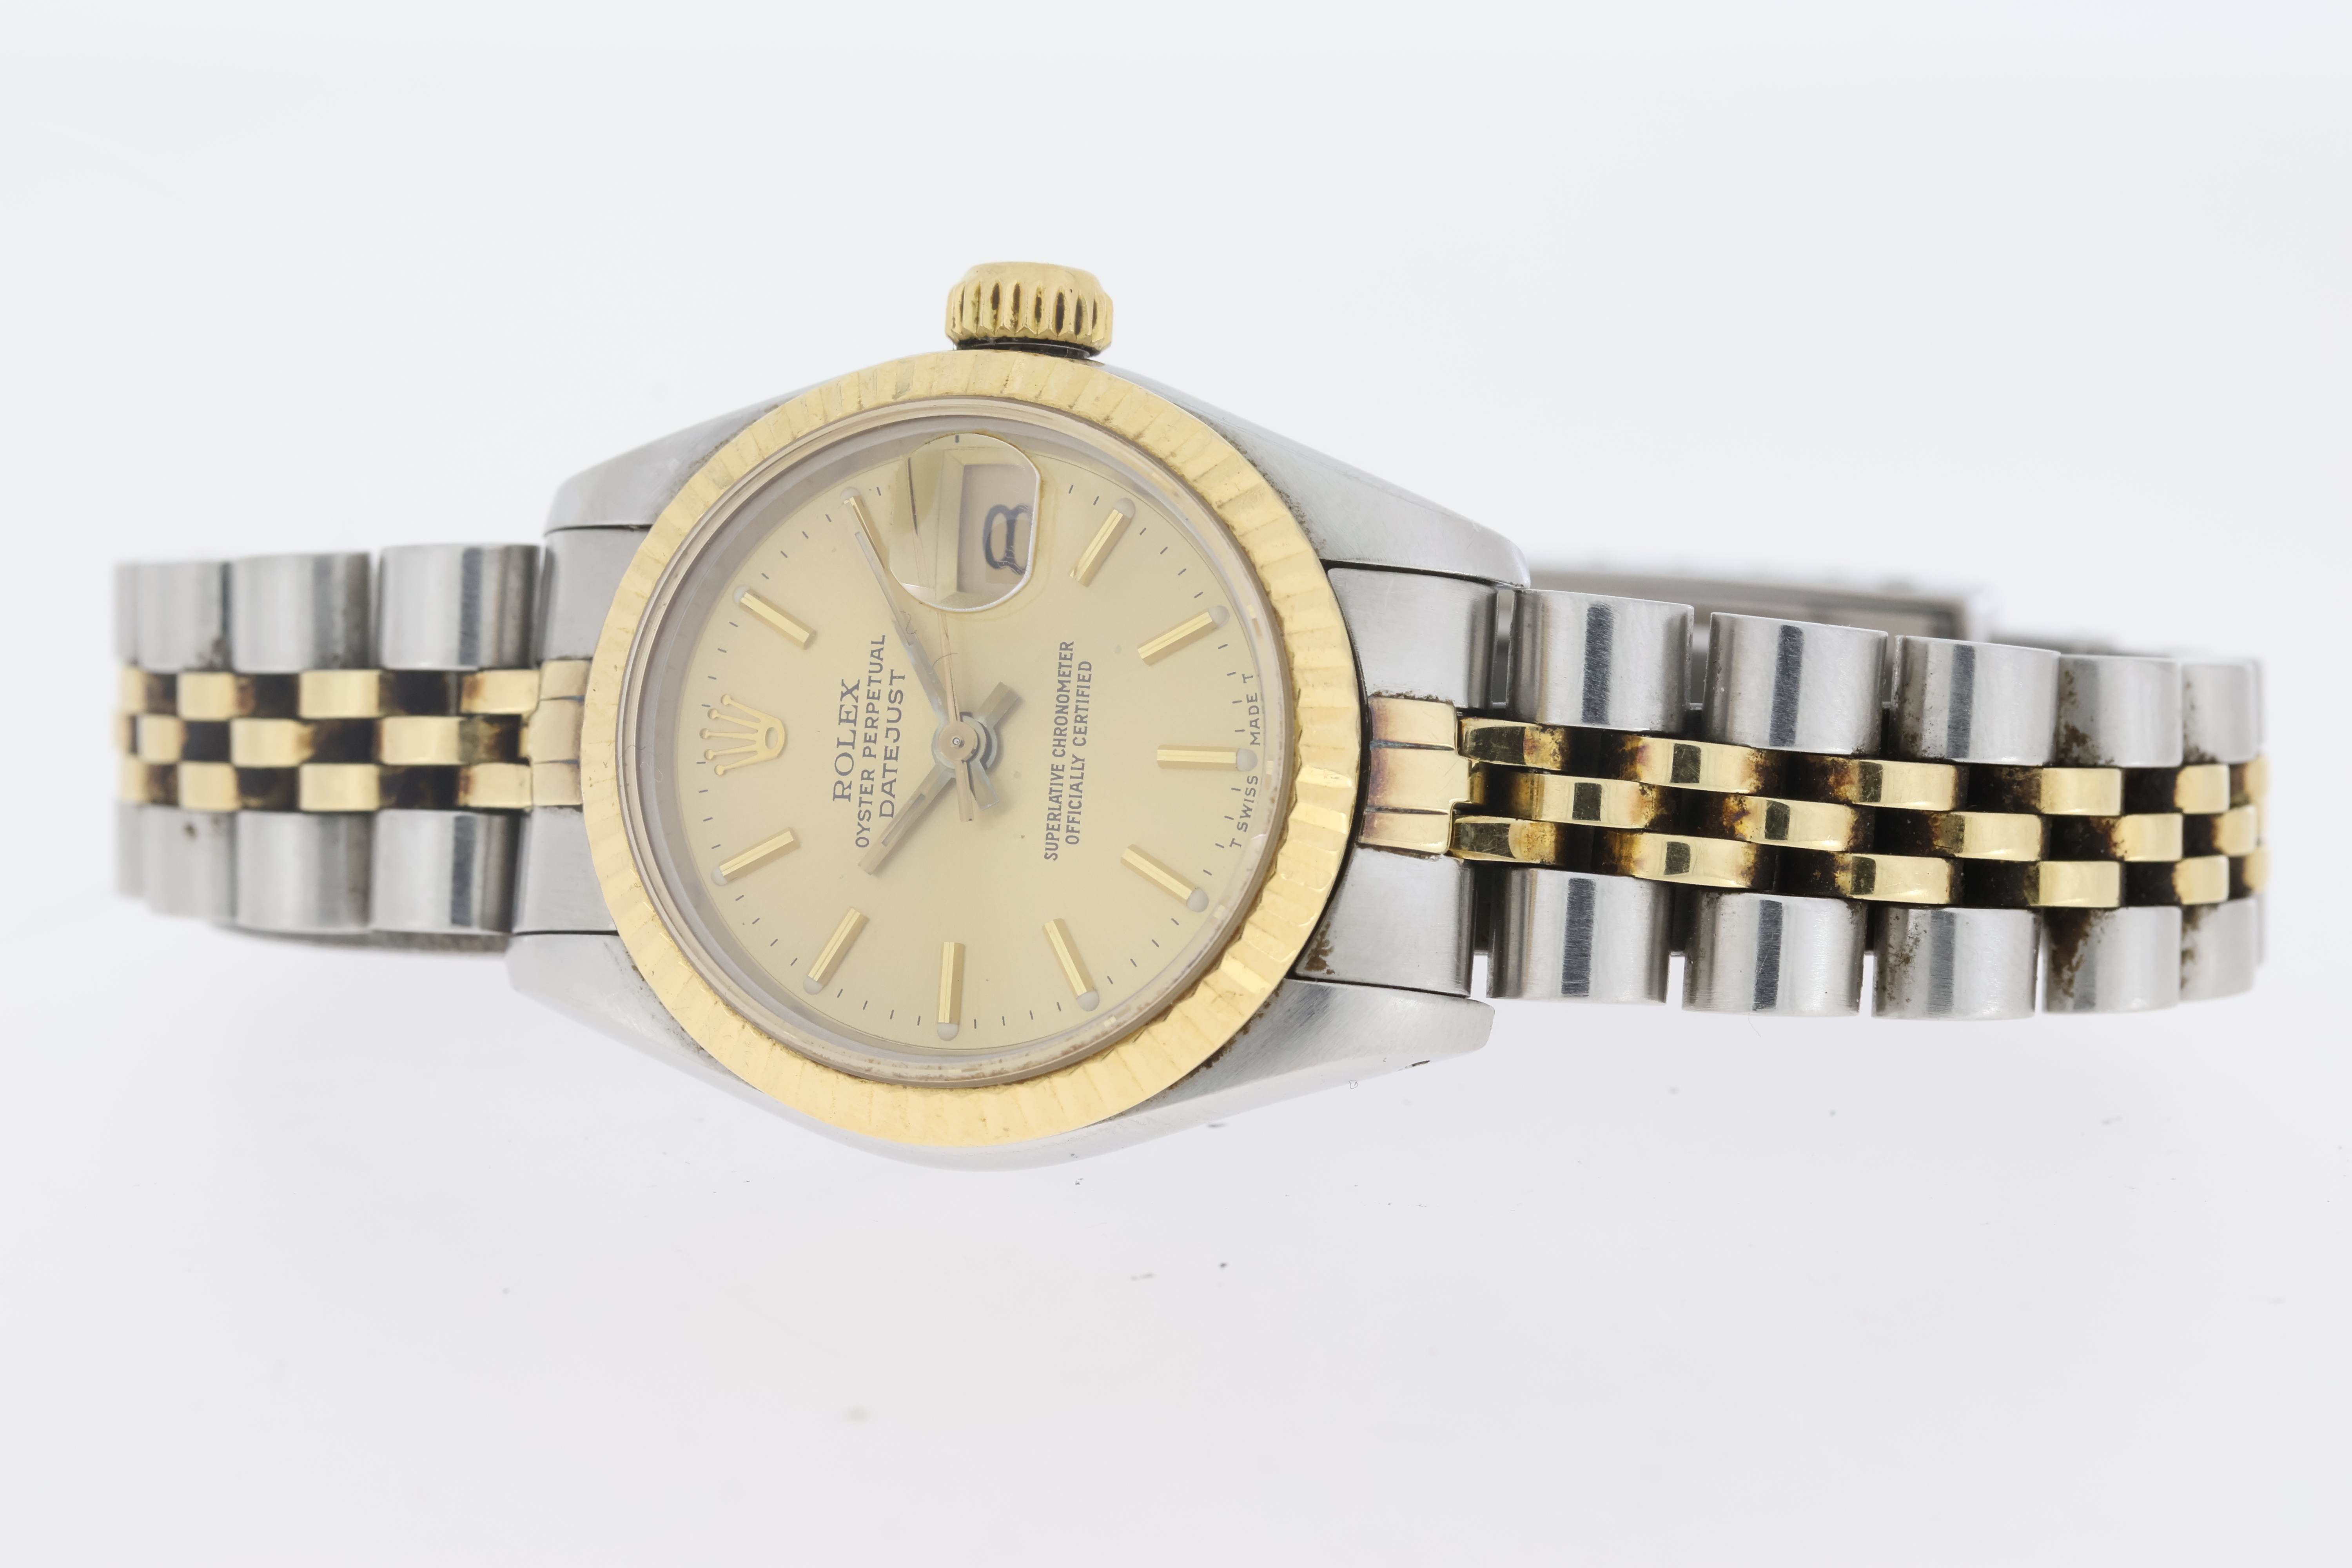 Ladies Rolex Datejust 26 Reference 69173 Box and Papers 1988 - Image 3 of 6